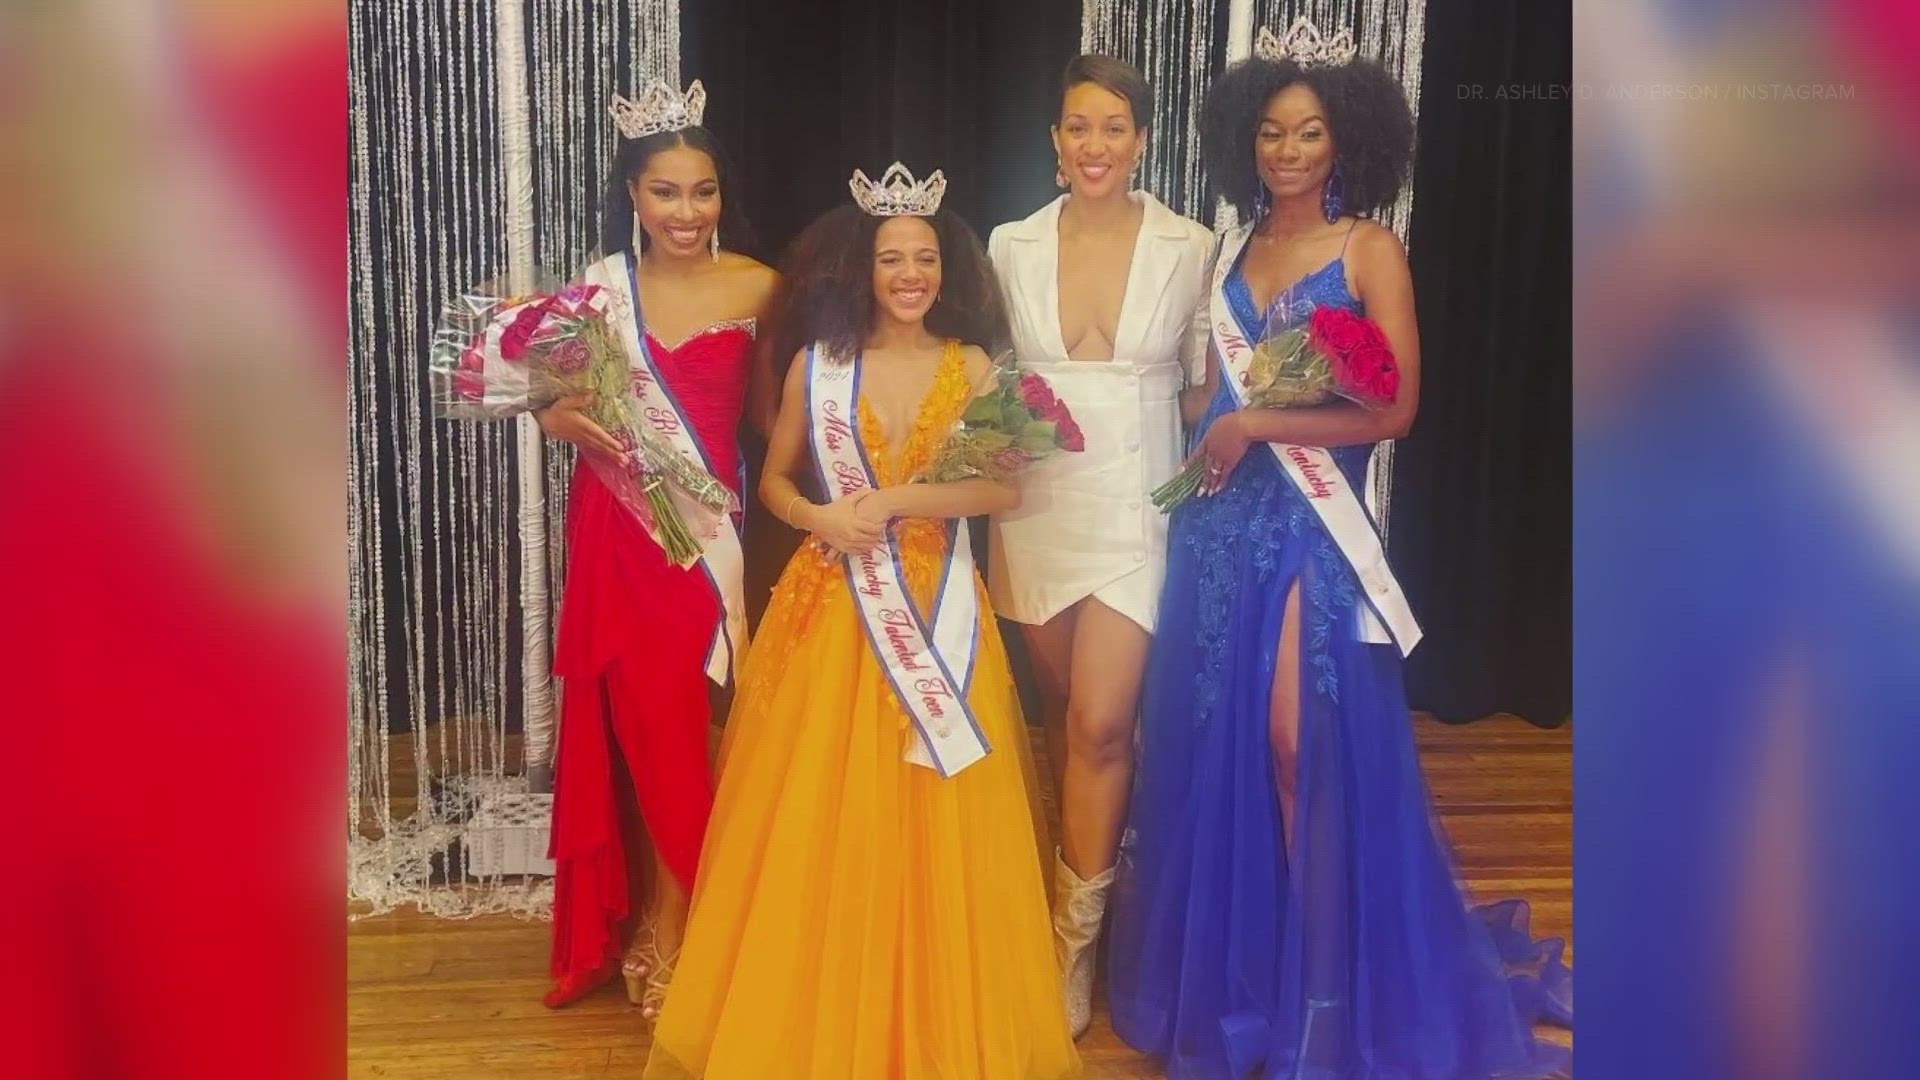 The pageant that aims to redefine beauty, crowned the winner in front of an audience at the Women's Club of Louisville Sunday evening.